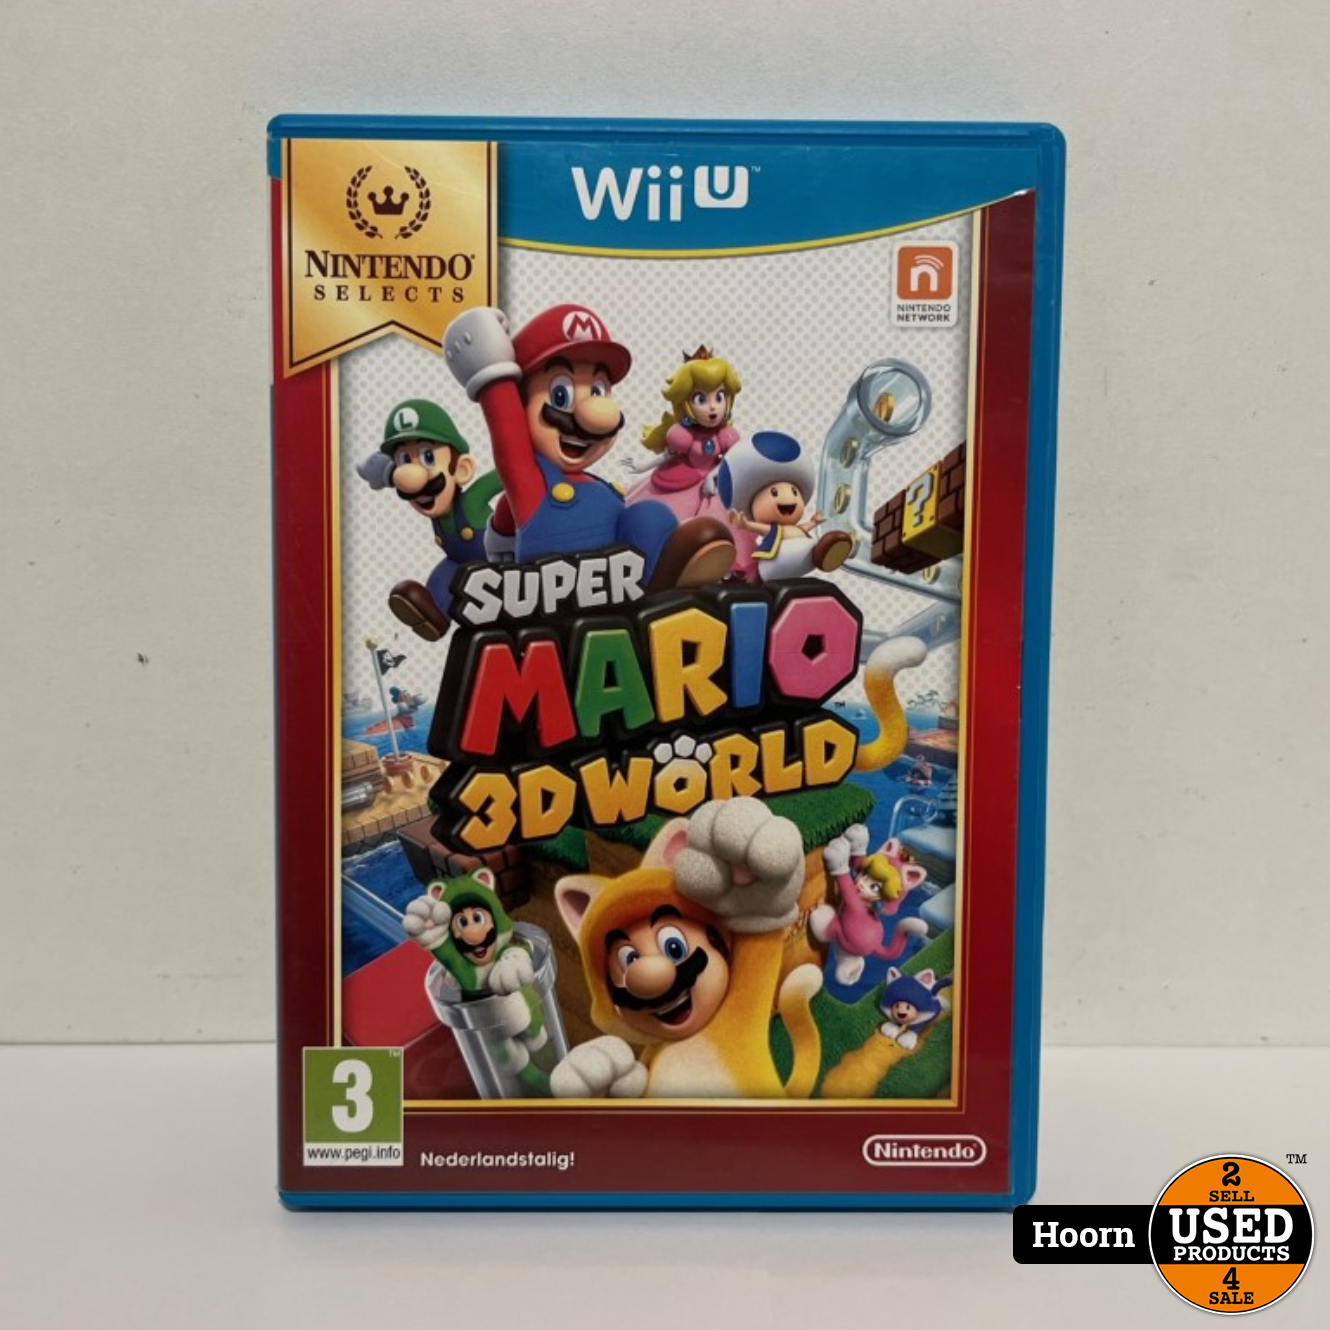 Wii U Game: Super 3D World - Used Products Hoorn